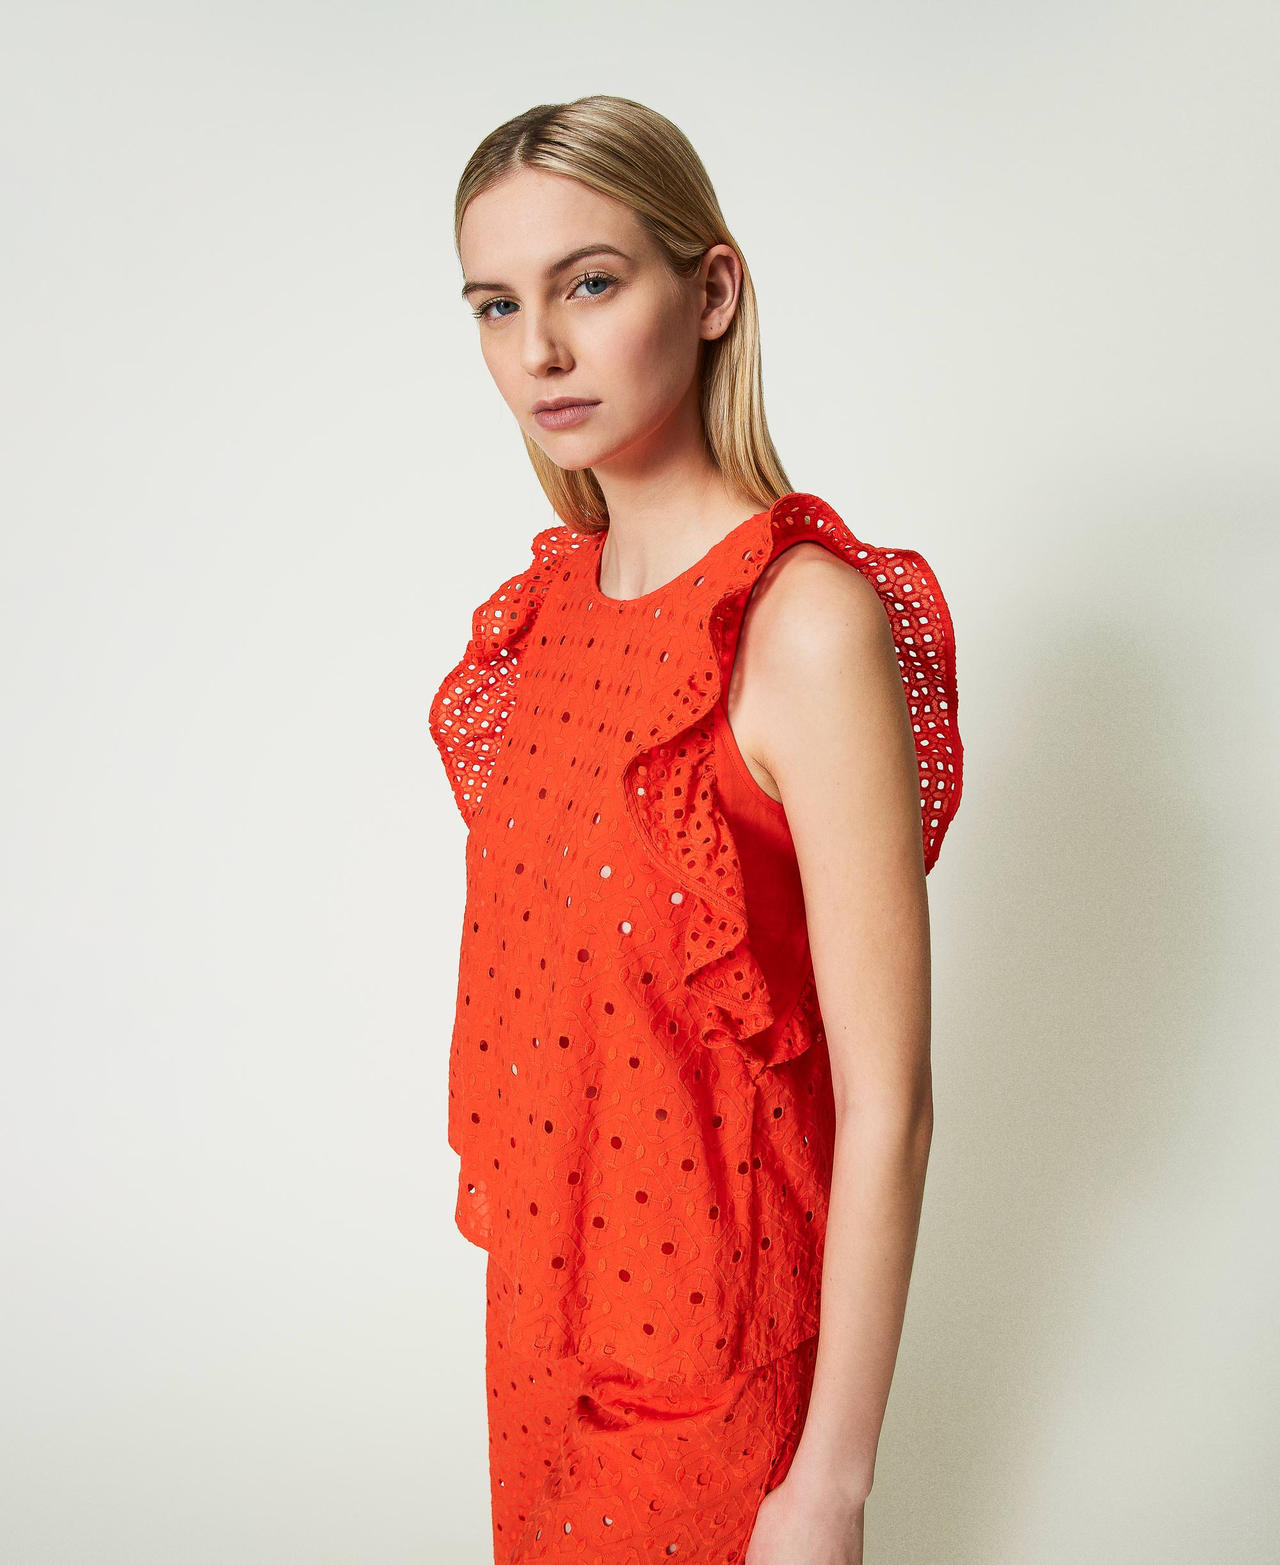 Top en broderie anglaise avec volant Rouge « Scarlet Ibis » Femme 241AT2070-02